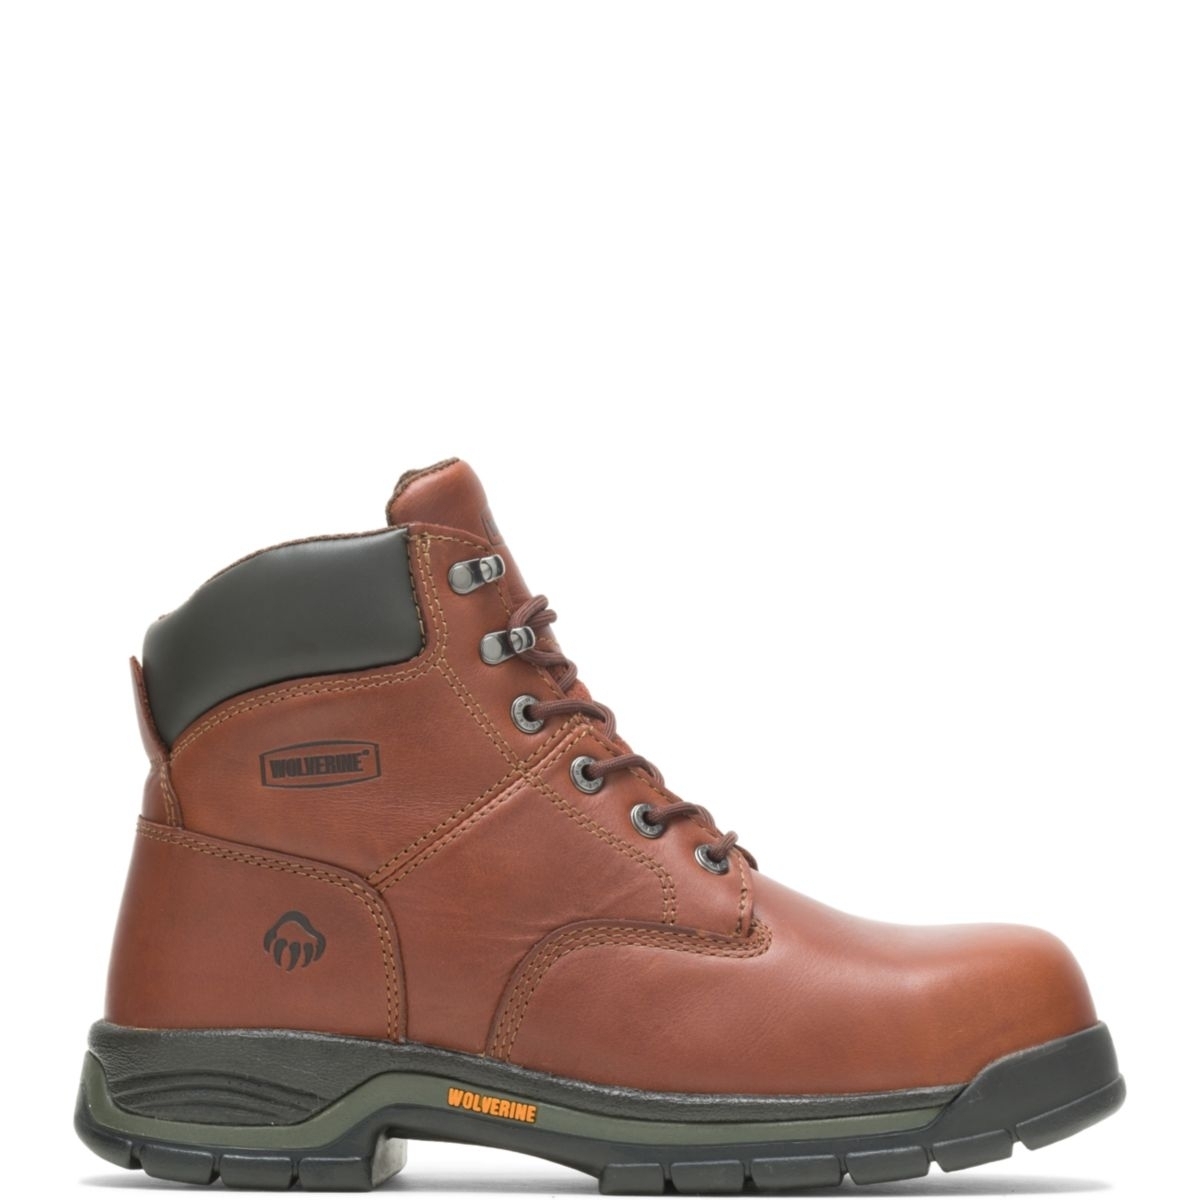 WOLVERINE Men's Harrison 6 Lace-Up SoftToe Work Boot Brown - W04906 Varies BROWN - BROWN, 14